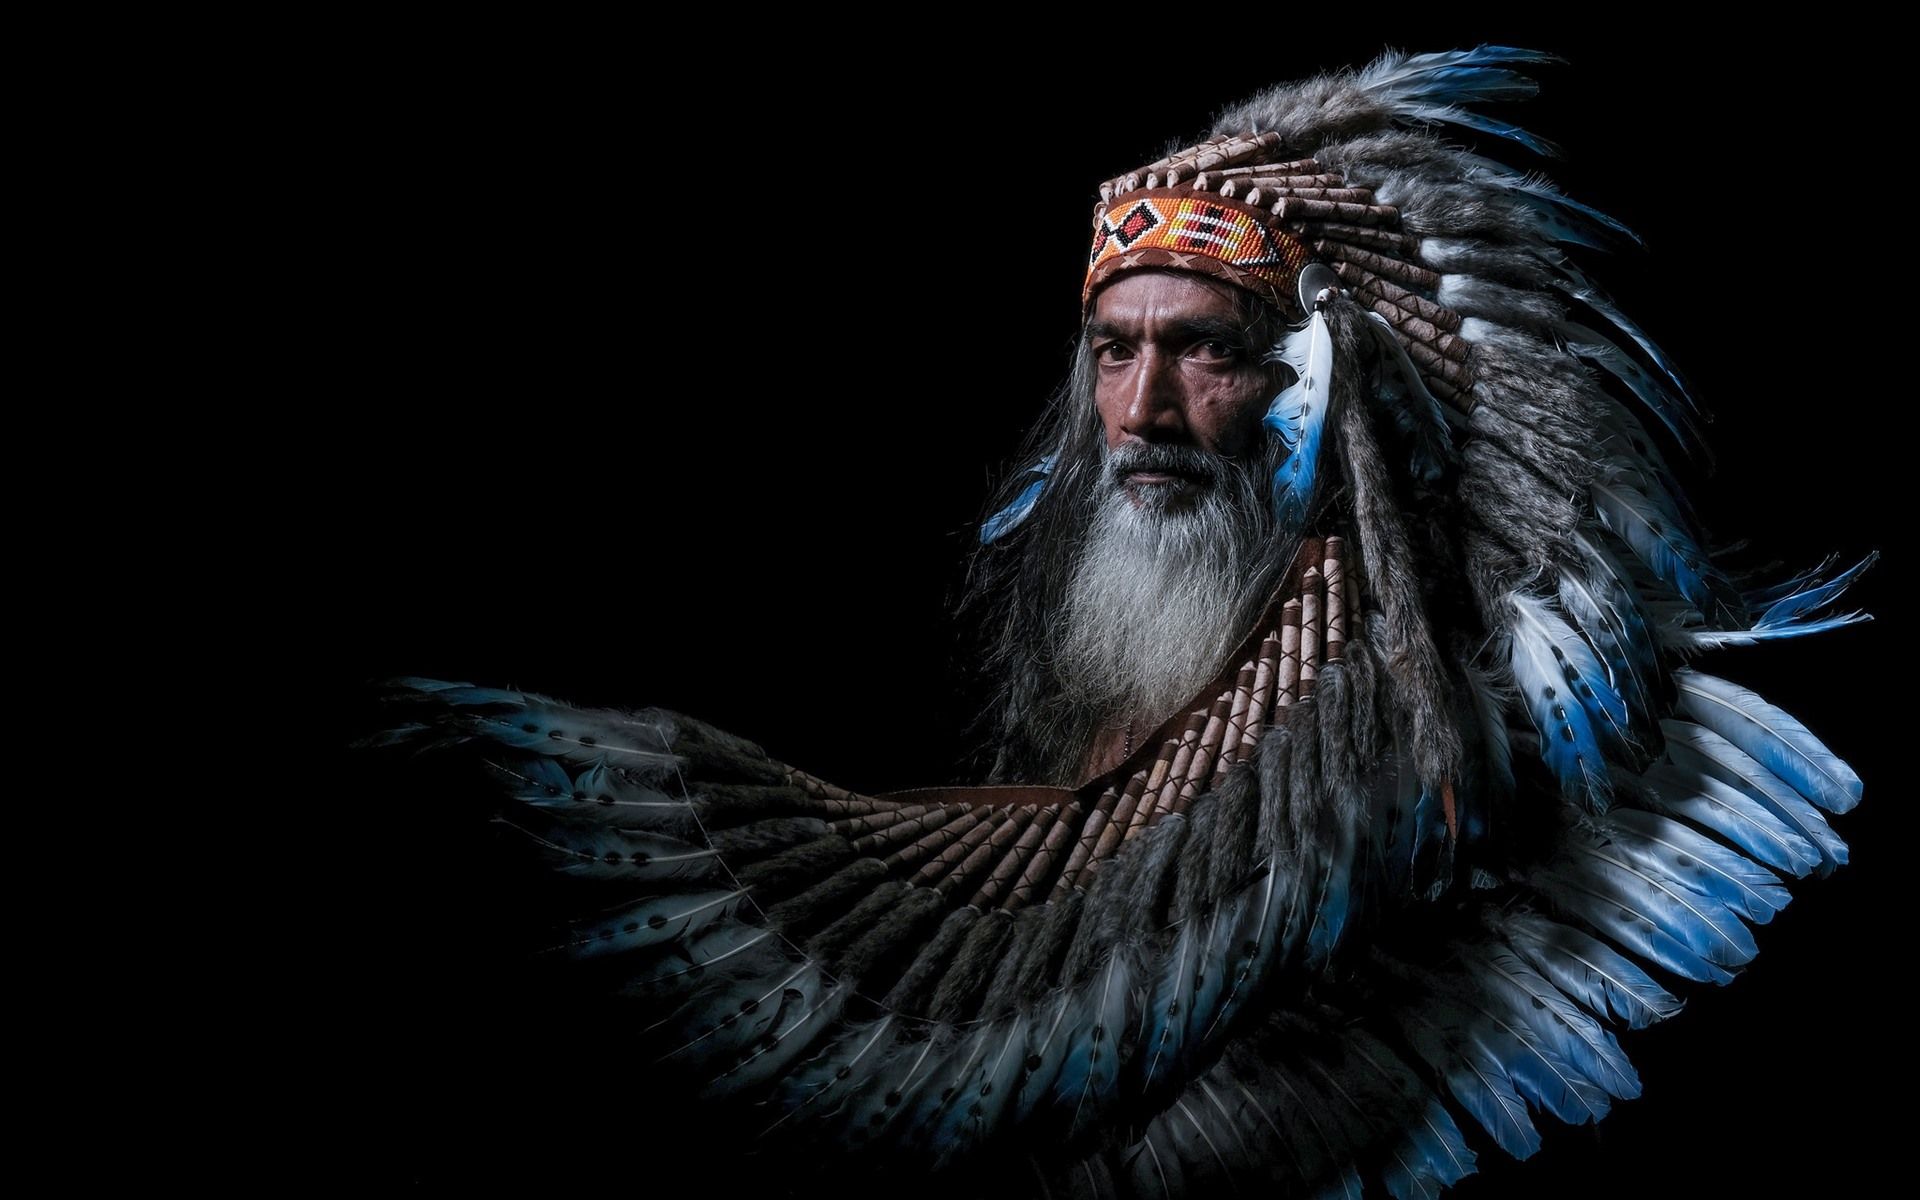 Wallpaper Indian, man, feathers, black background 1920x1200 HD